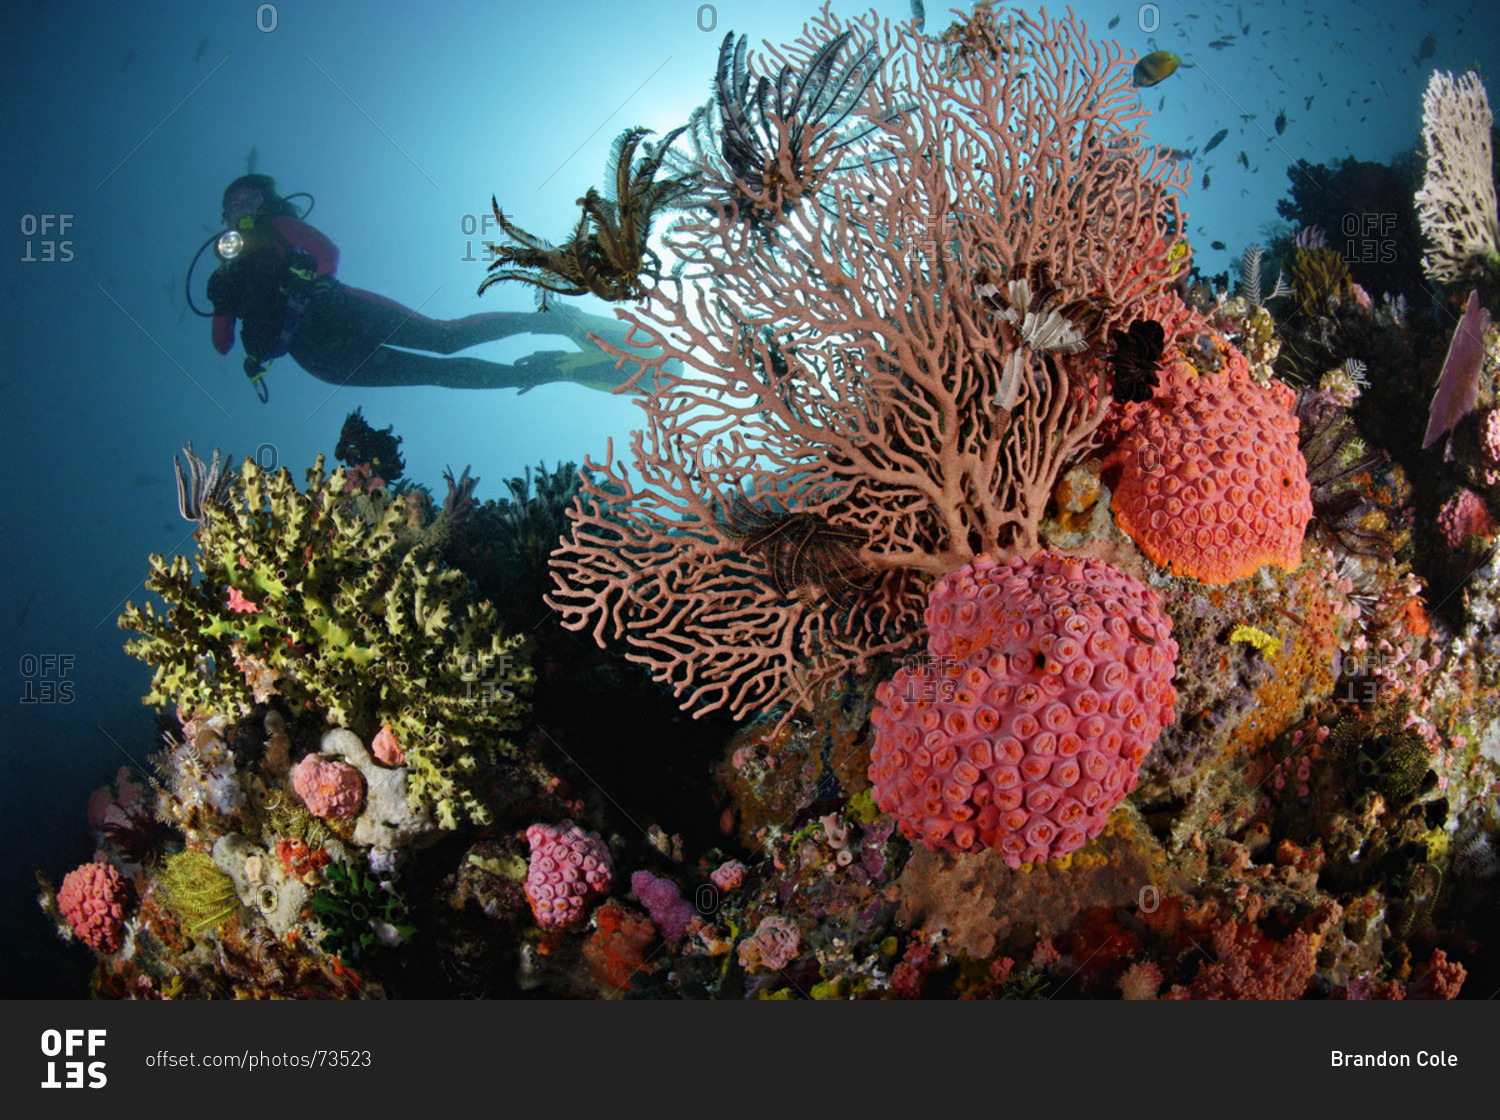 Scuba diver swims overtop rich coral reef, with sea fans, cup corals, crinoids, in tropical Indo-Pacific Ocean region